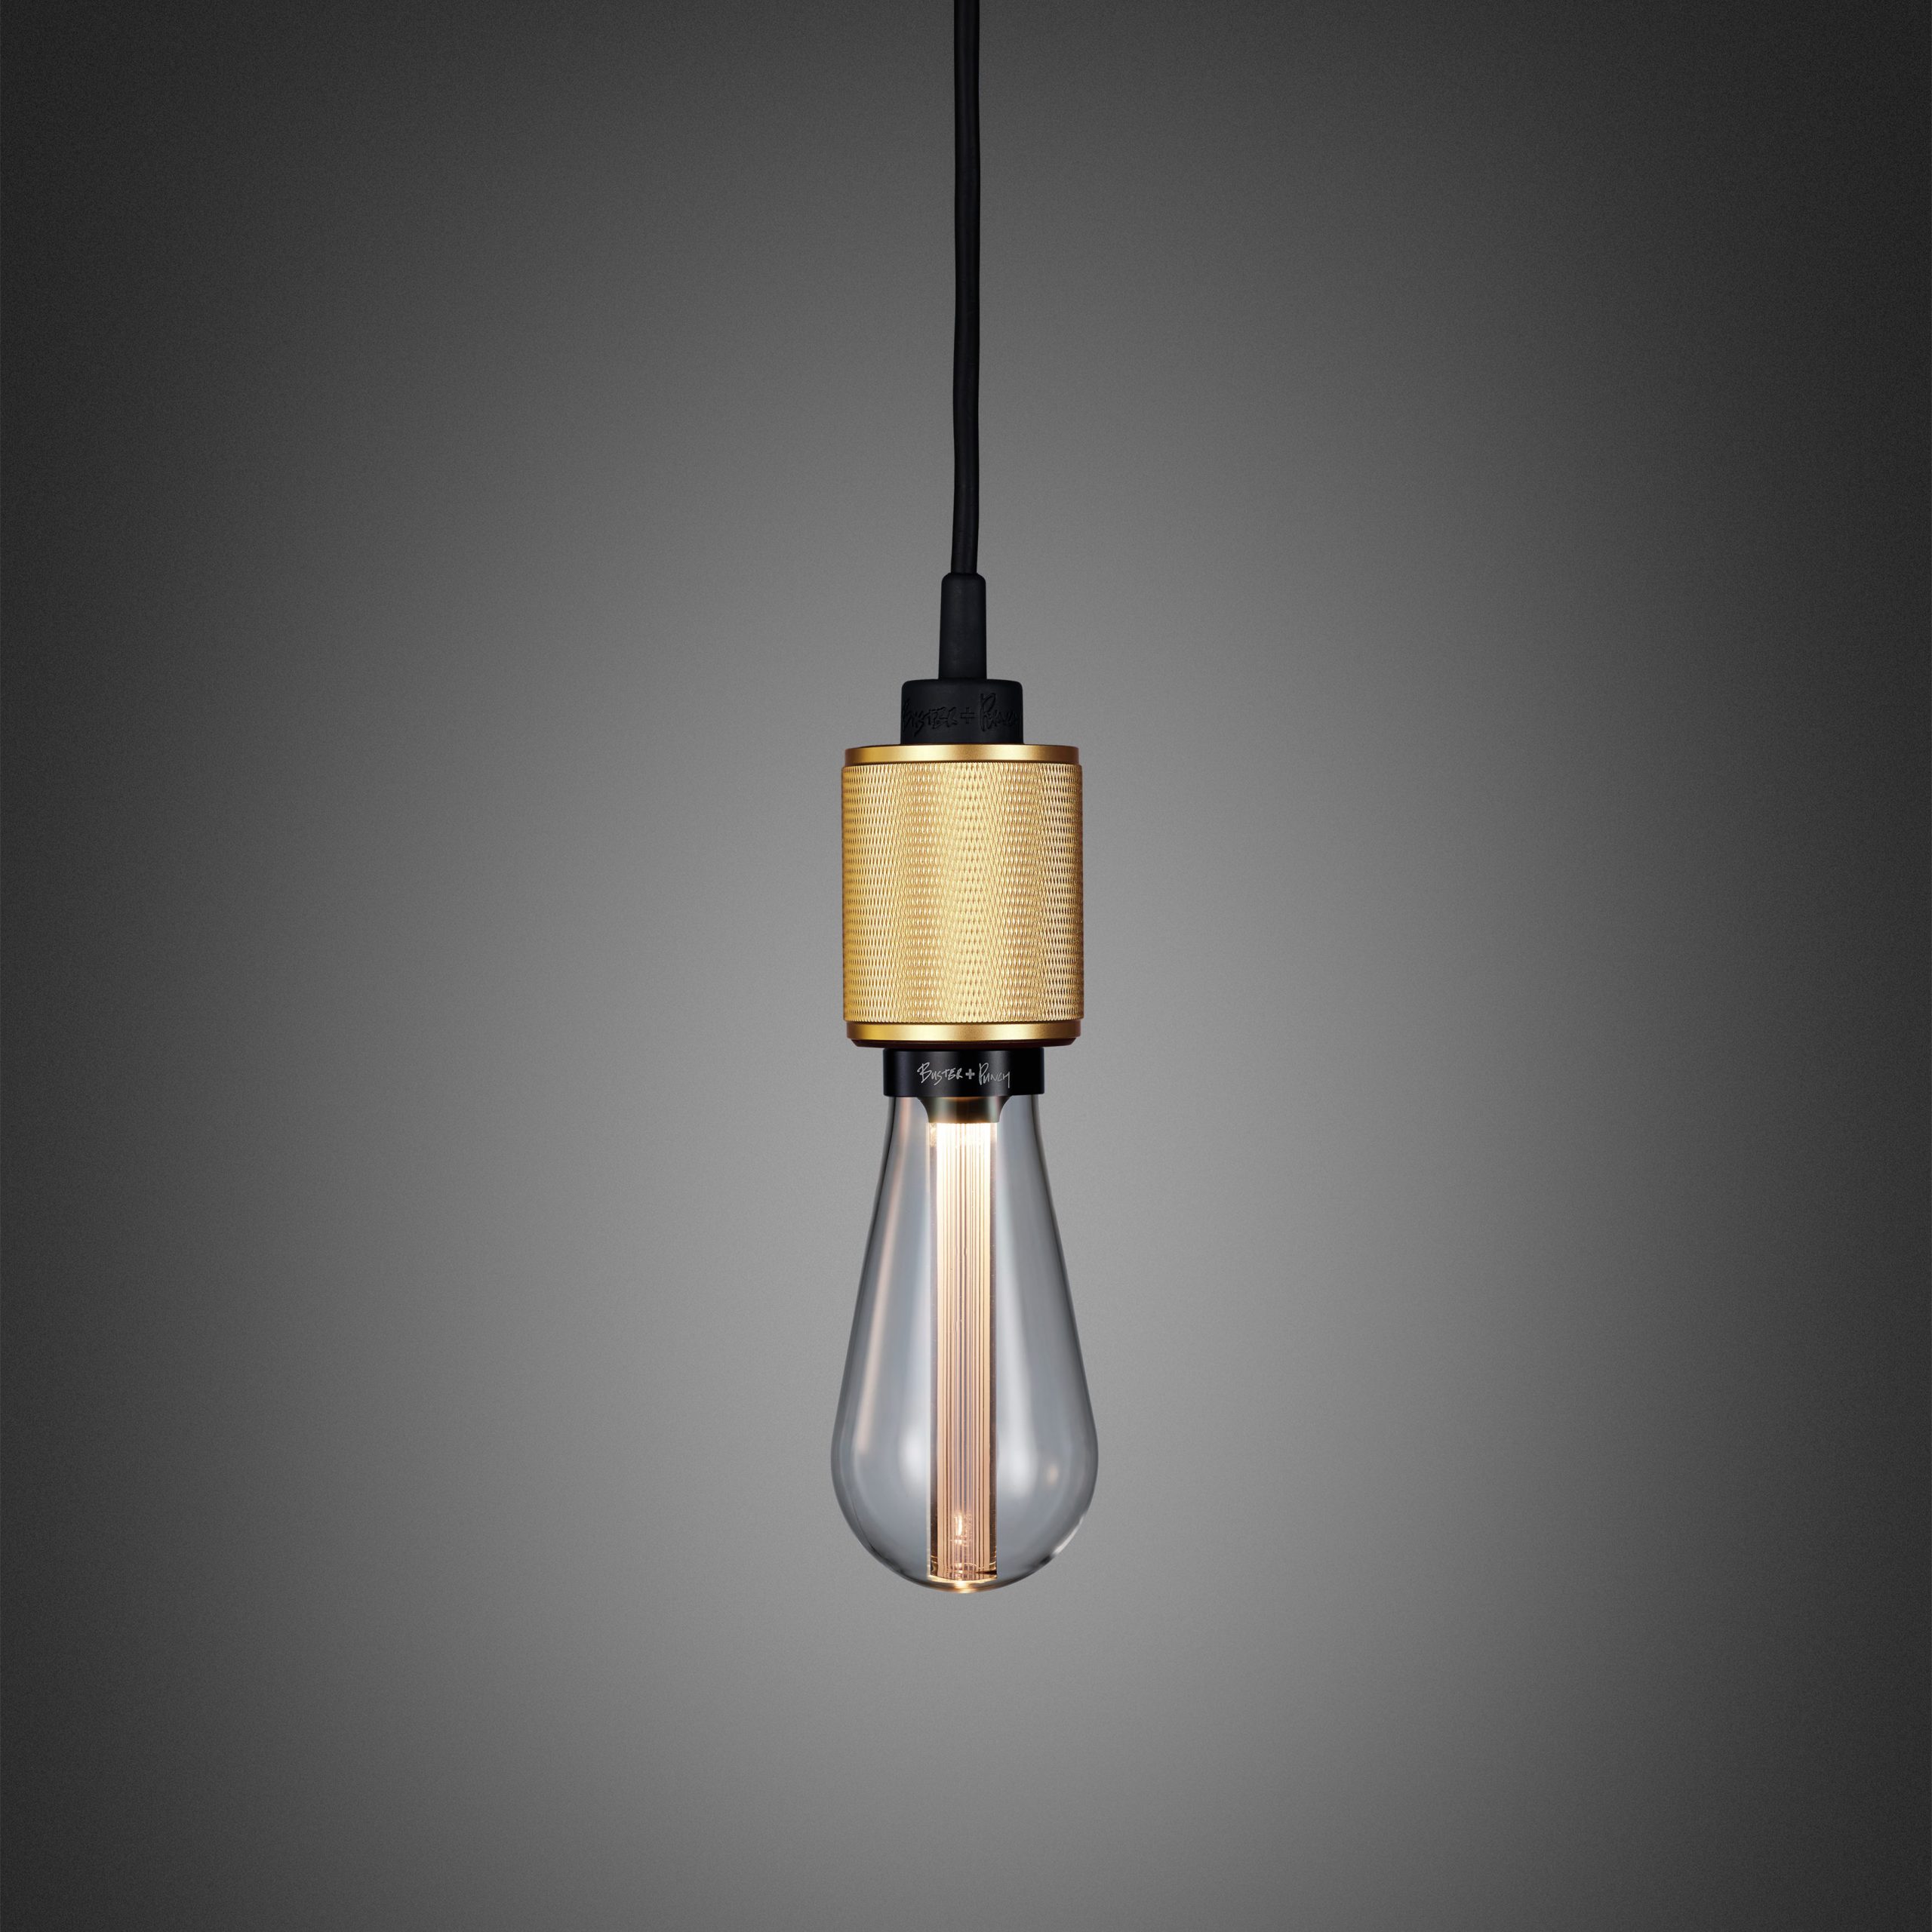 https://www.busterandpunch.com/us/wp-content/uploads/sites/2/2020/06/1.BusterPunch_Heavy_Metal_Brass_Crystal_Bulb_1-scaled.jpg